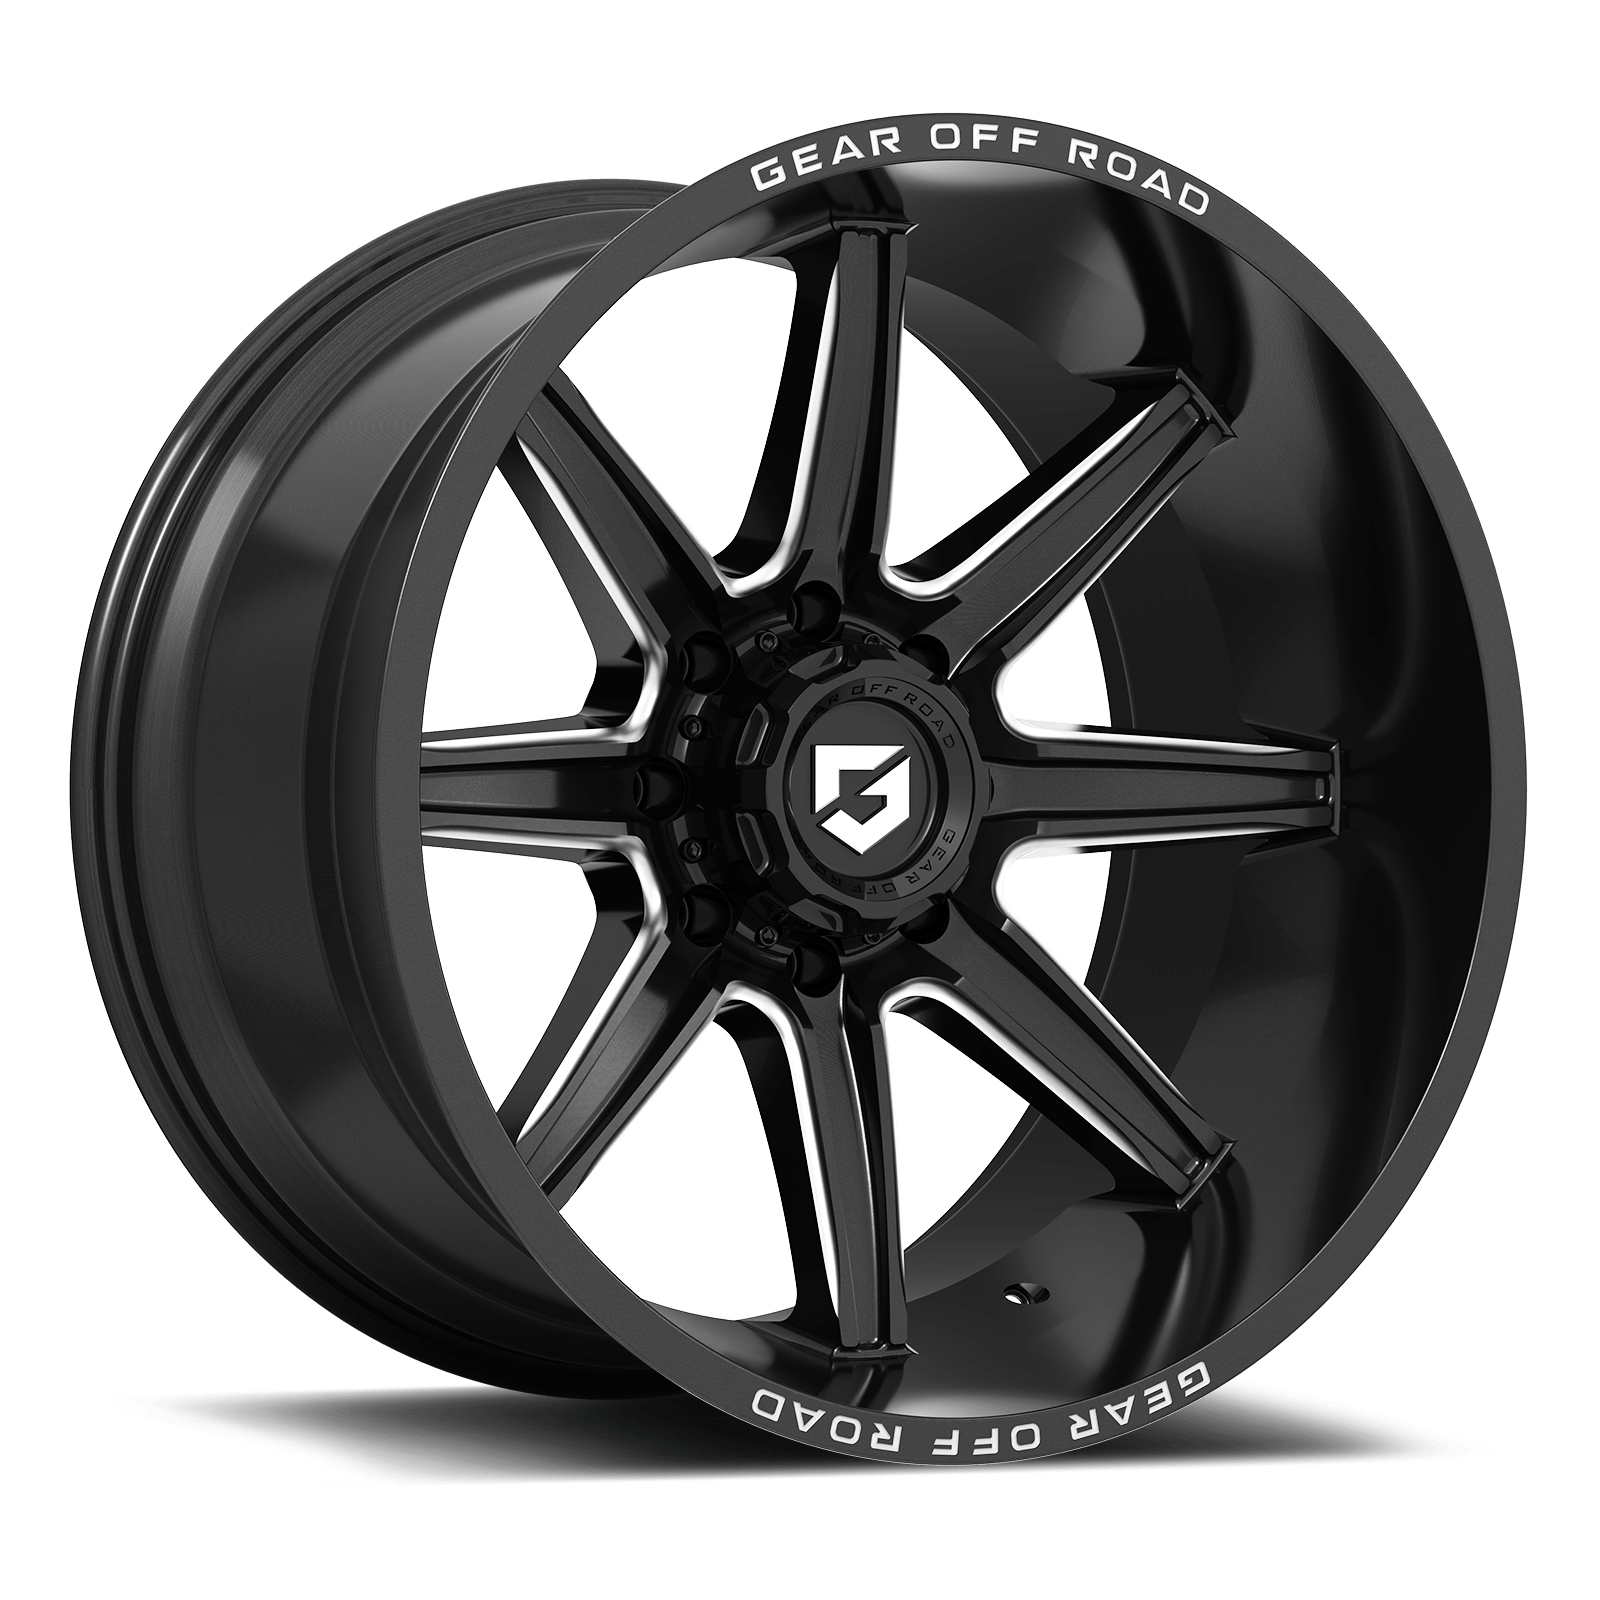 Gear Off Road 765BM 765BM-8906818 18X9 6X135 / 6X5.50 (+18) G/A 765BM (HB 106.2) Gloss Black with Milled Accents & Lip Logo A260819 - image 1 of 3